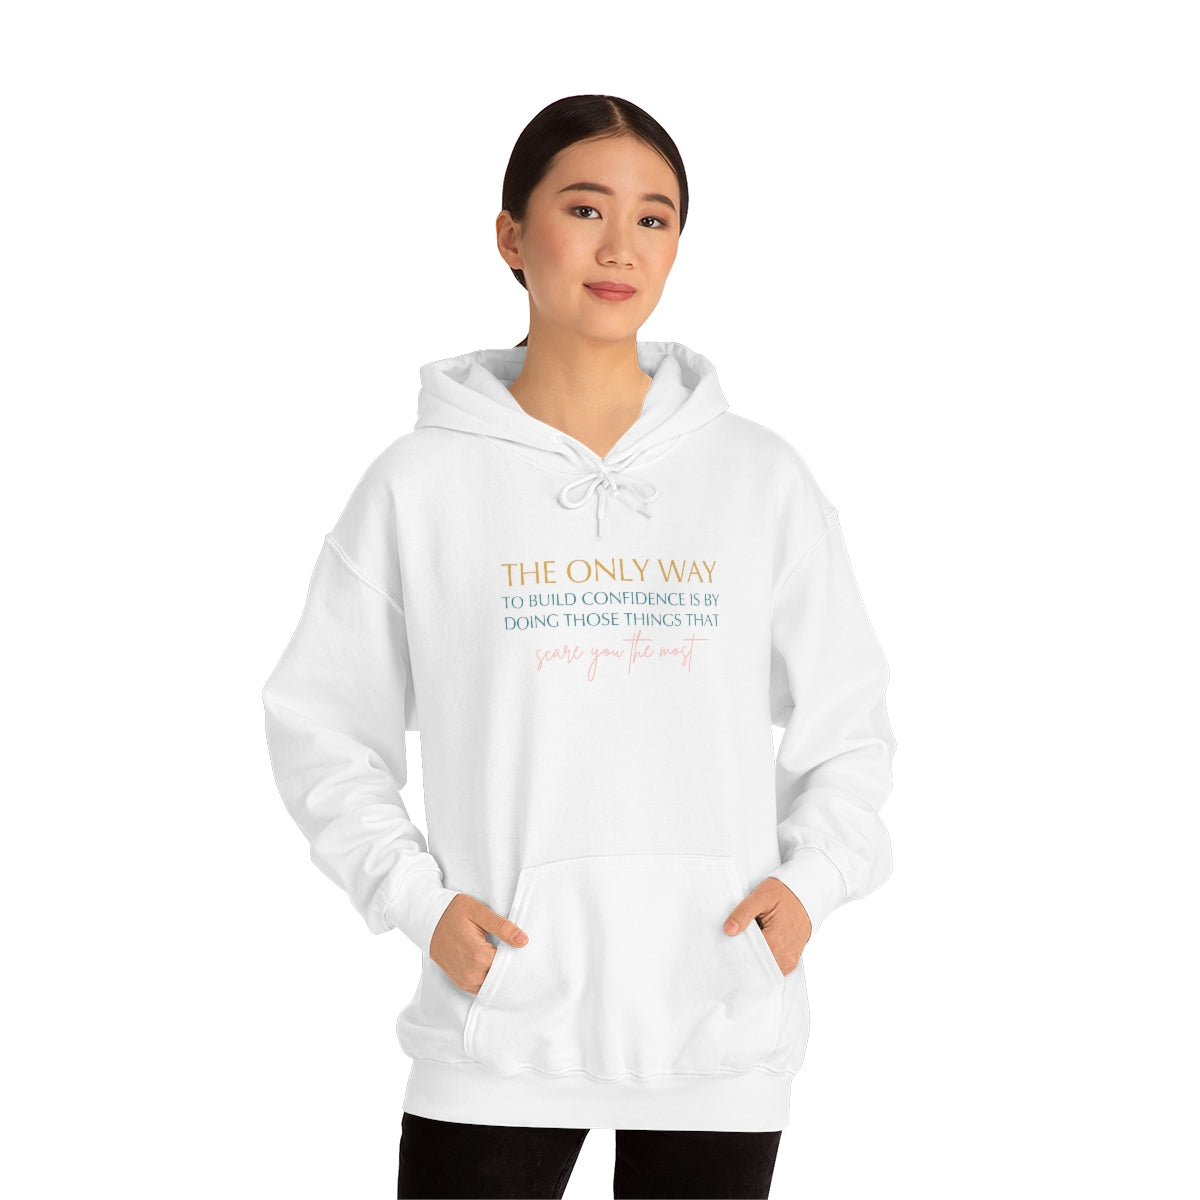 "The Only Way" Unisex Heavy Blend™ Hooded Sweatshirt